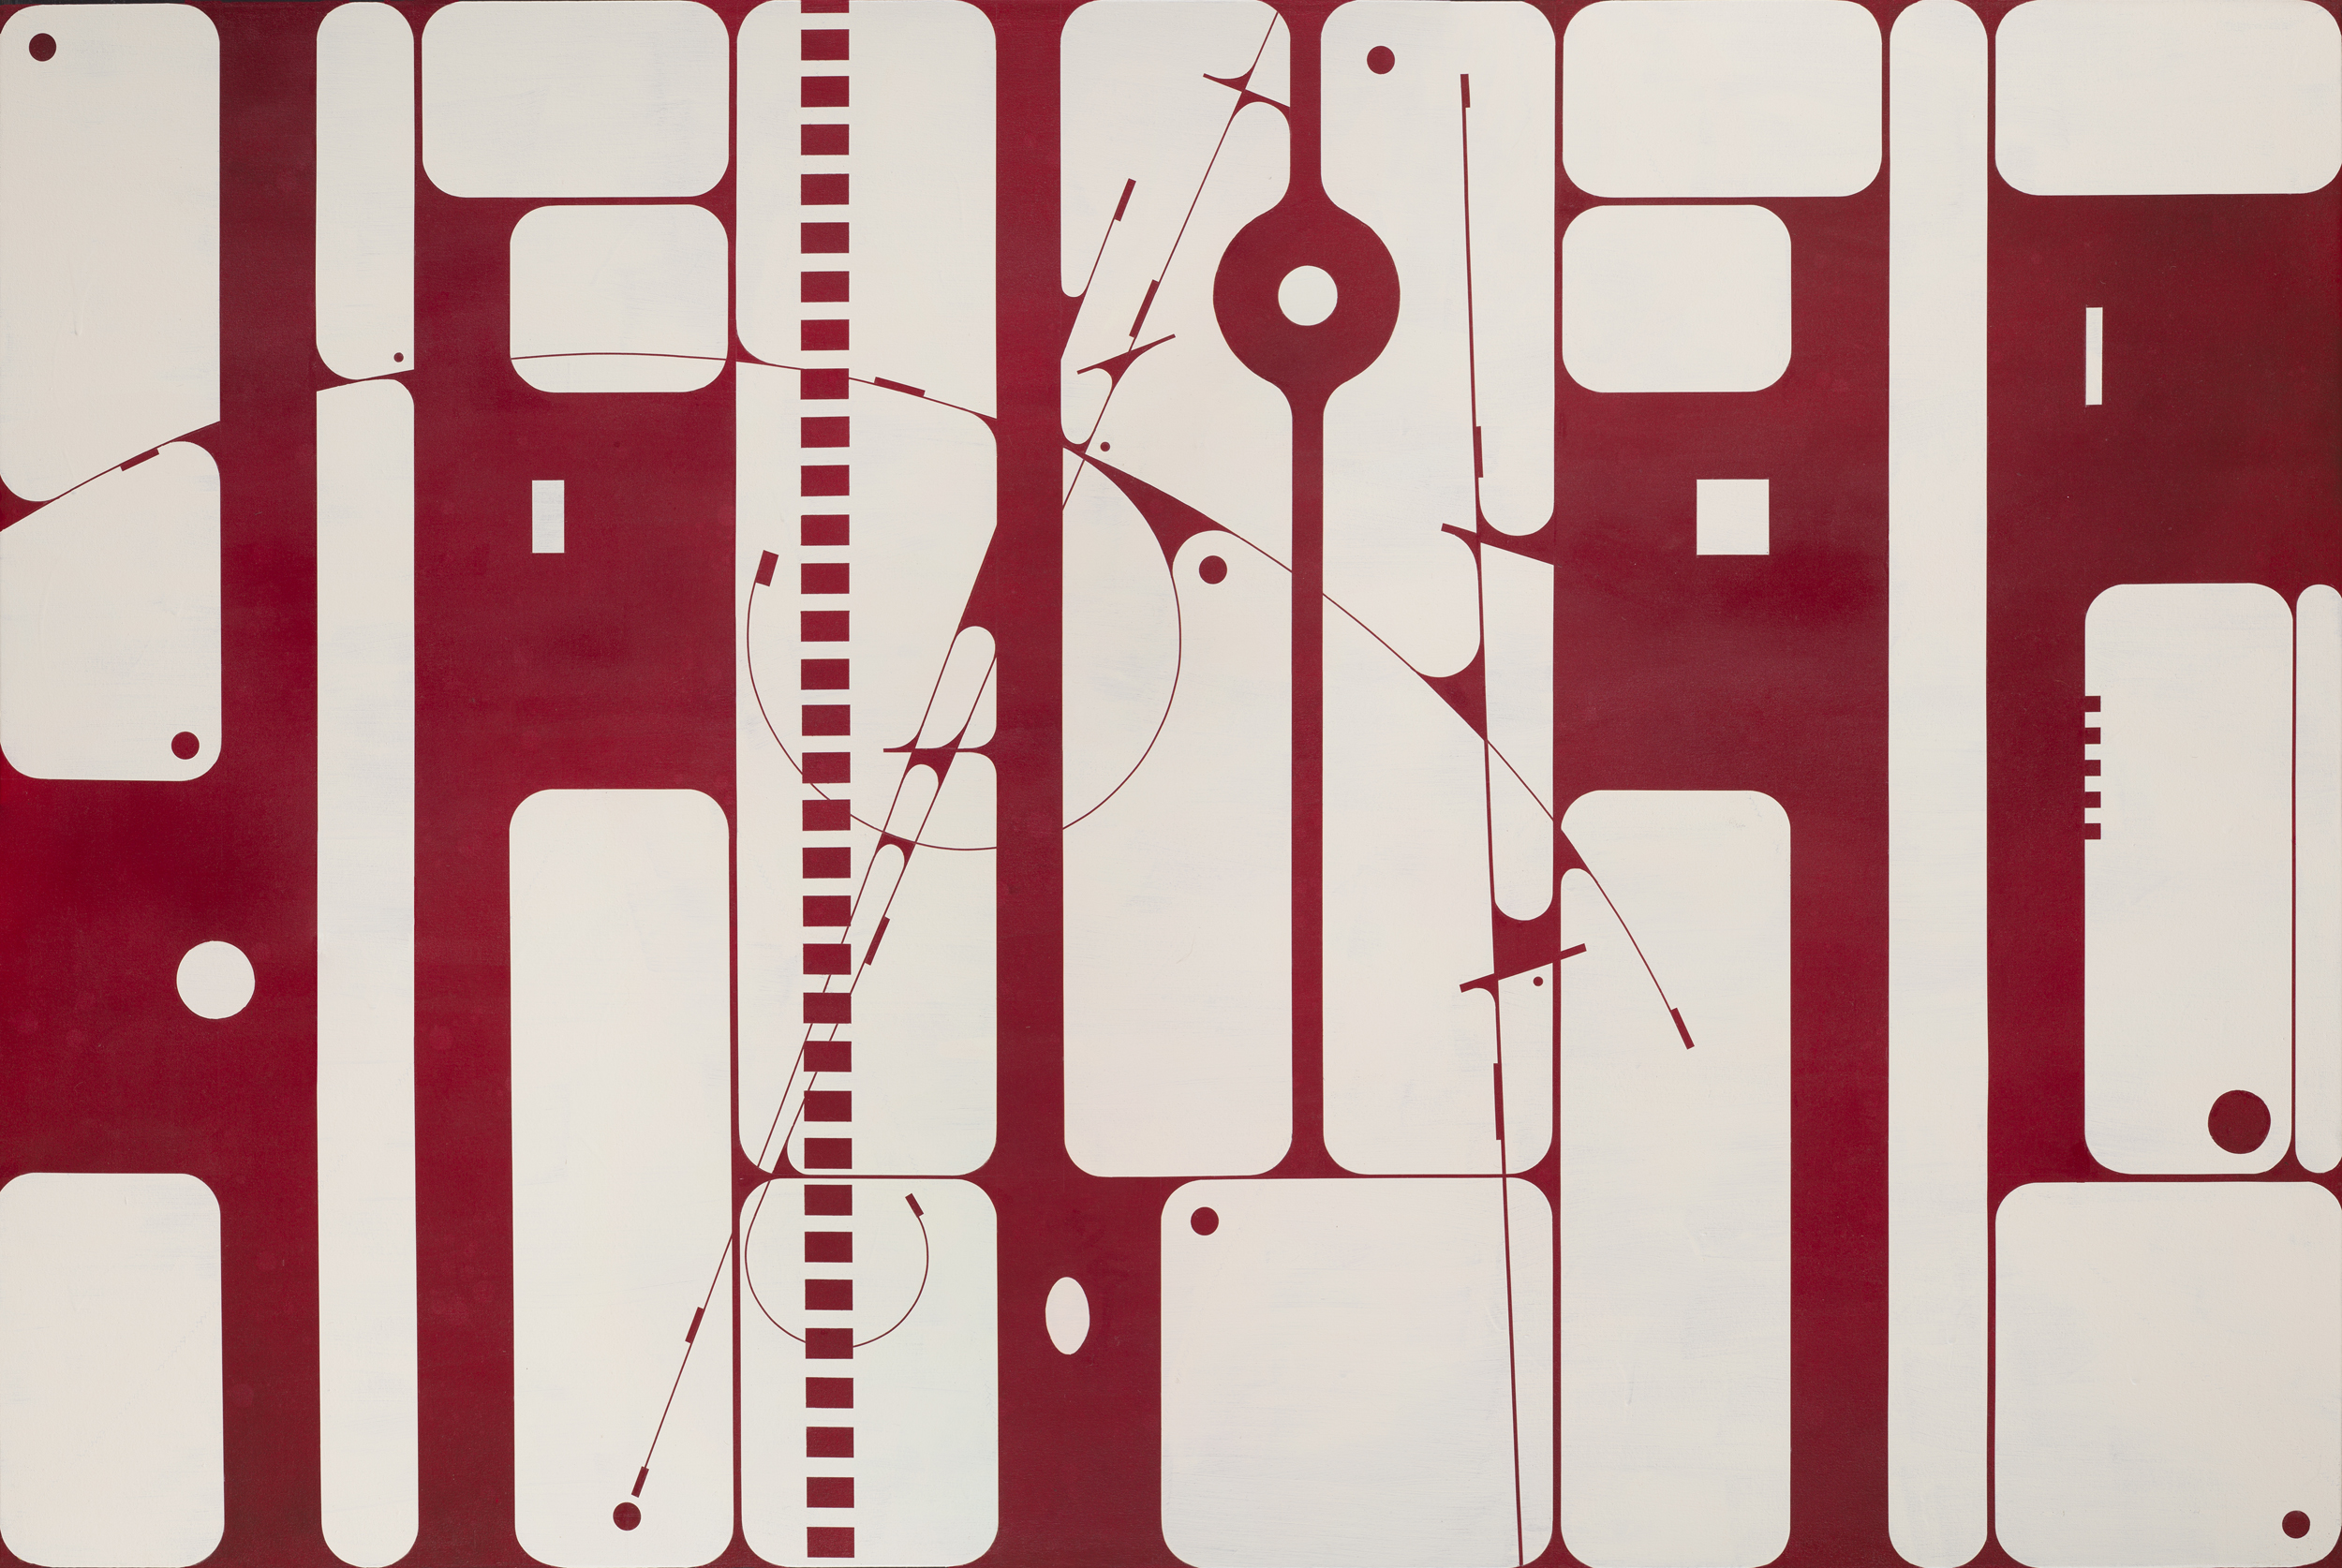 A large format abstract painting.  It has an off-white background with large dark red almost machine-like shapes combined with more organic lyrical vine-like lines. 